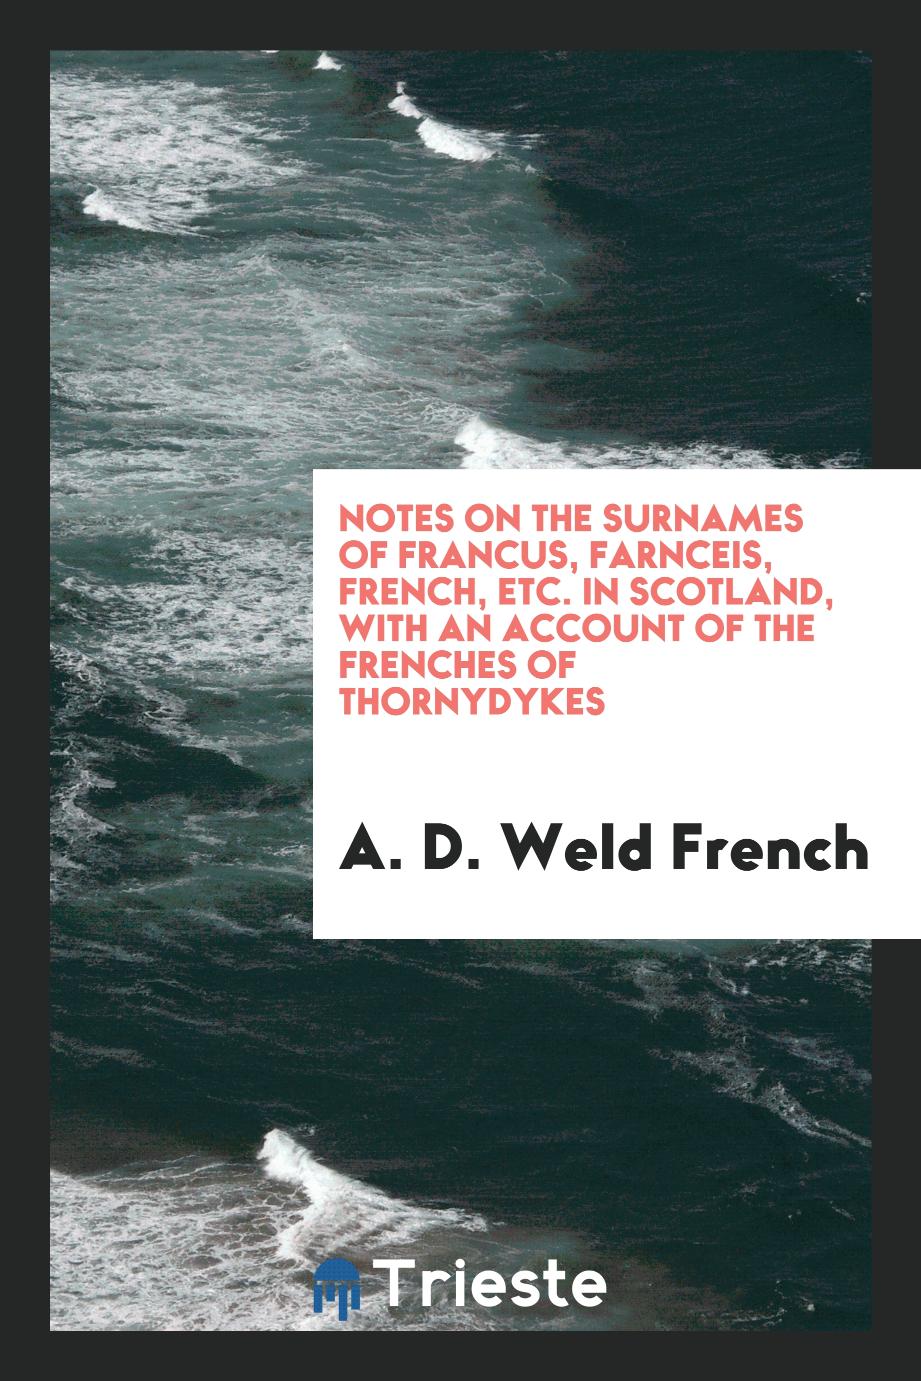 Notes on the surnames of Francus, Farnceis, French, etc. in Scotland, with an account of the Frenches of Thornydykes